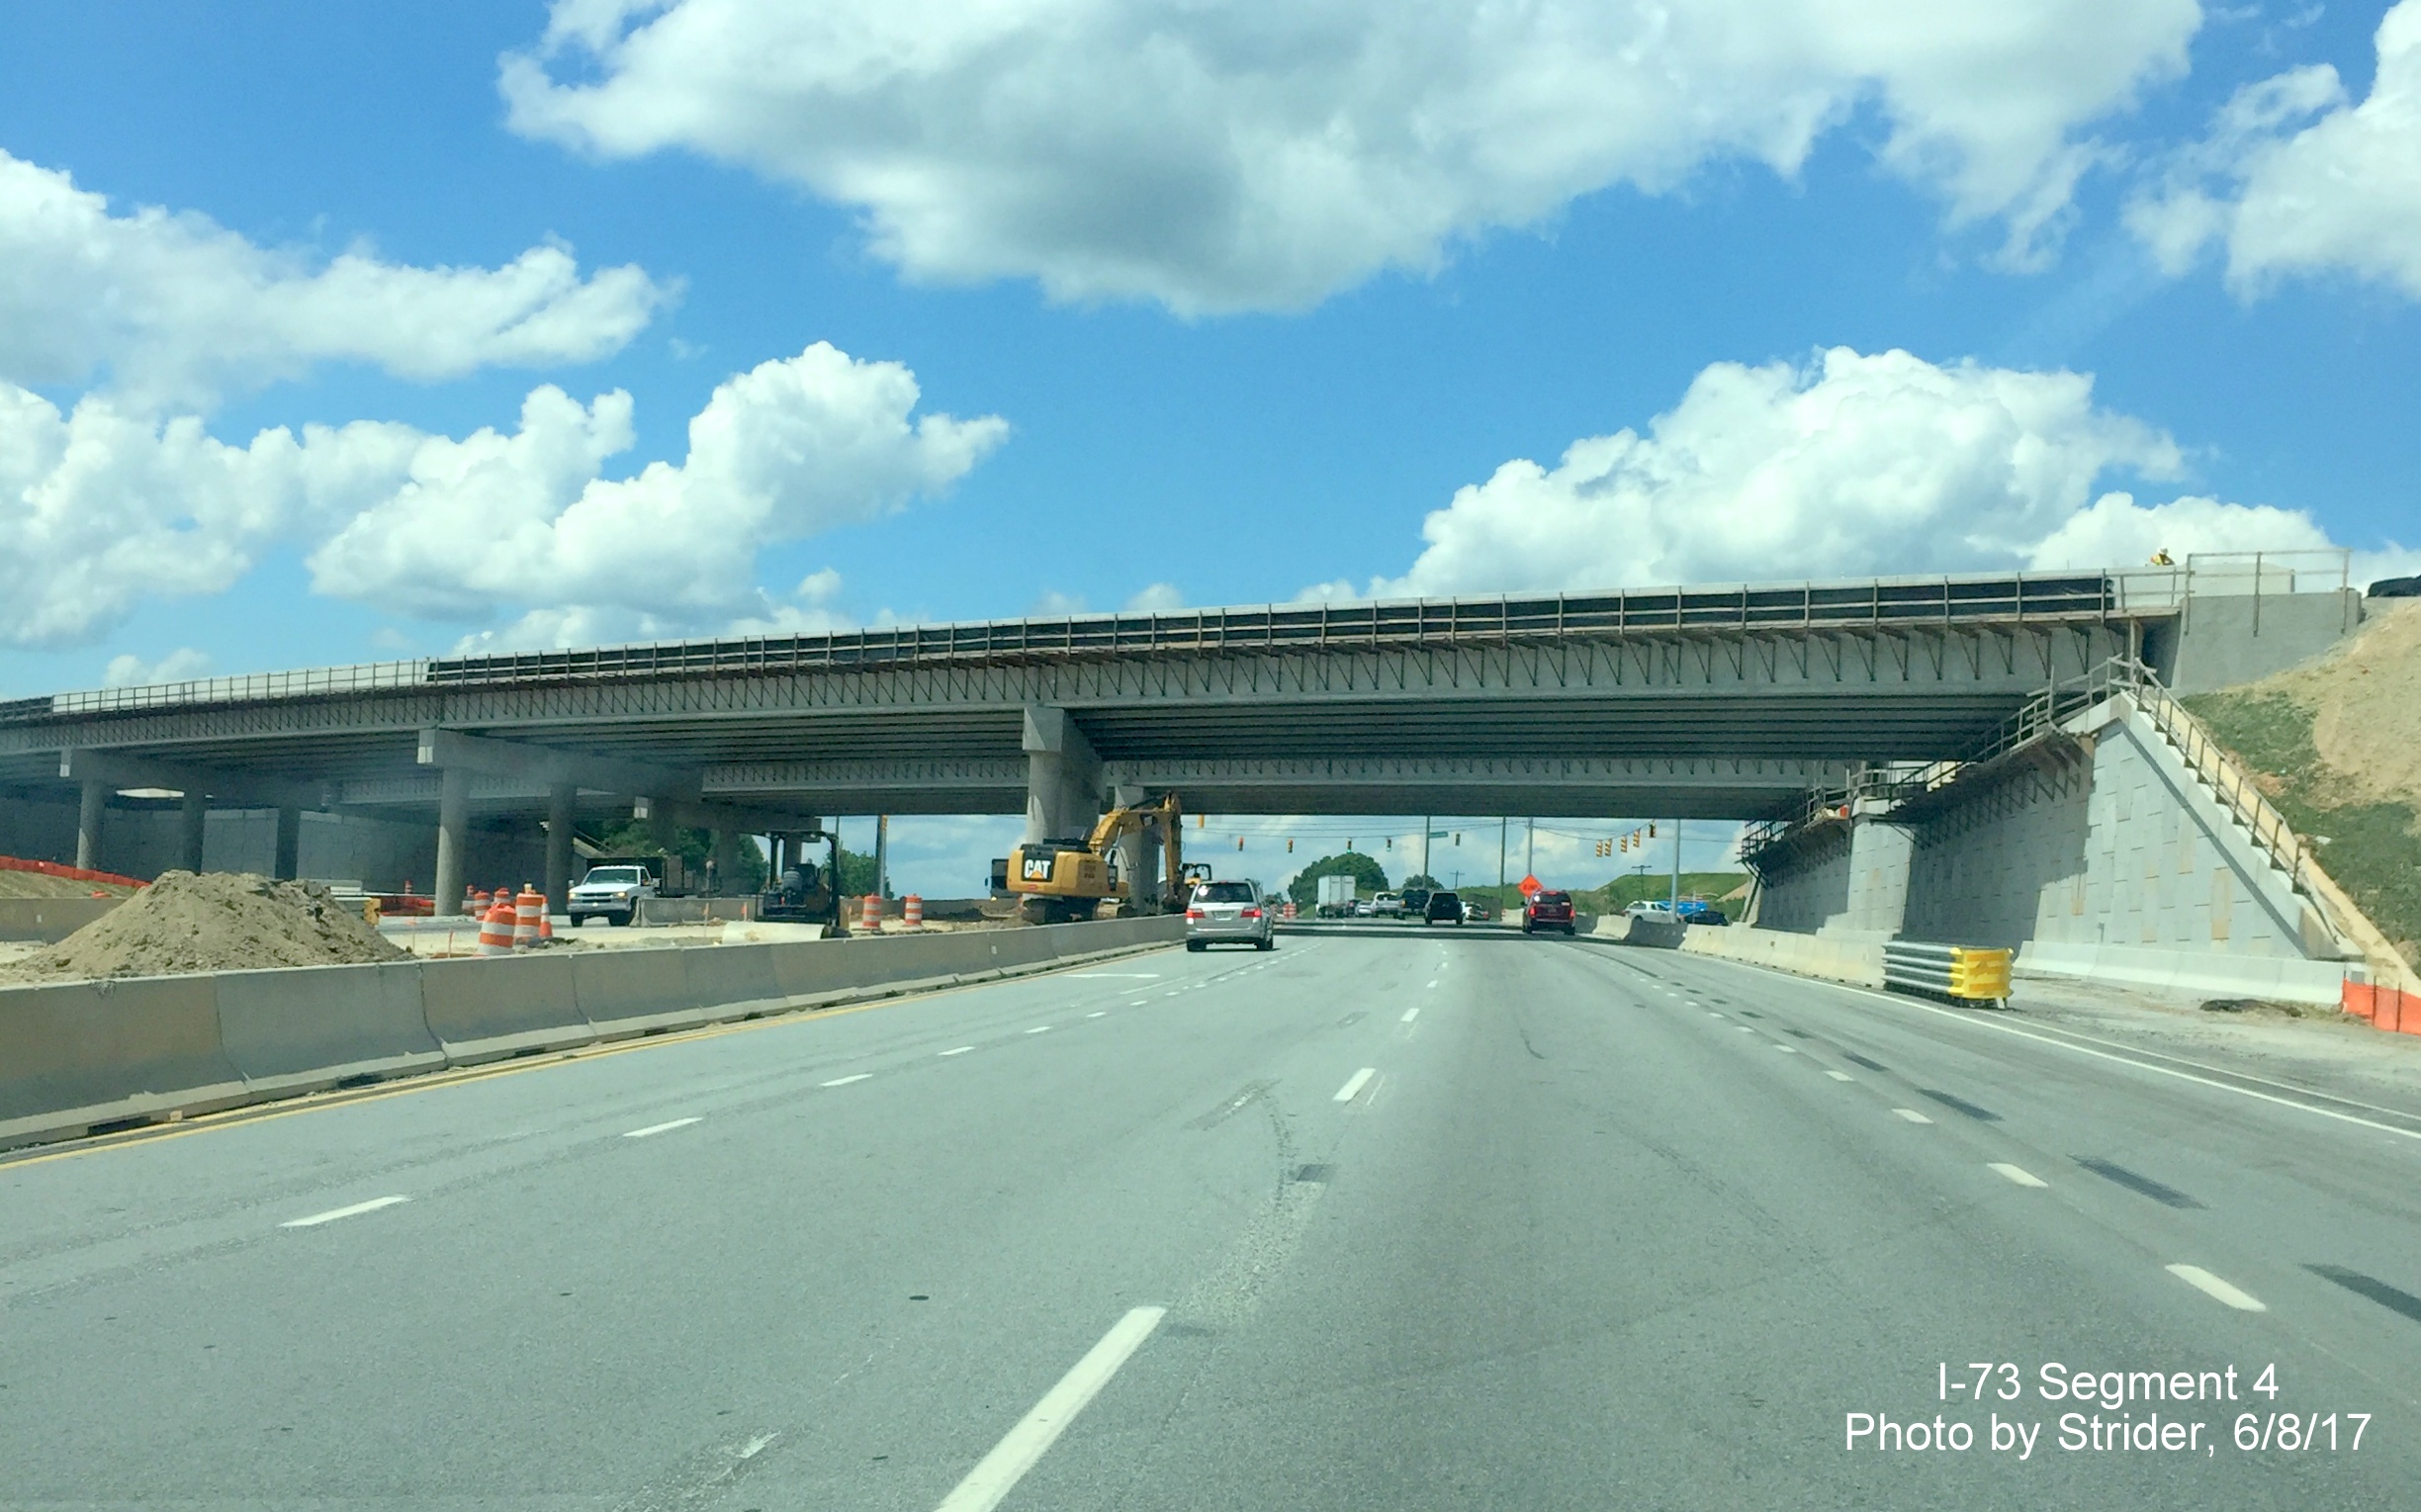 Image taken of future I-73 North and South bridges over NC 68 in Greensboro, from Strider